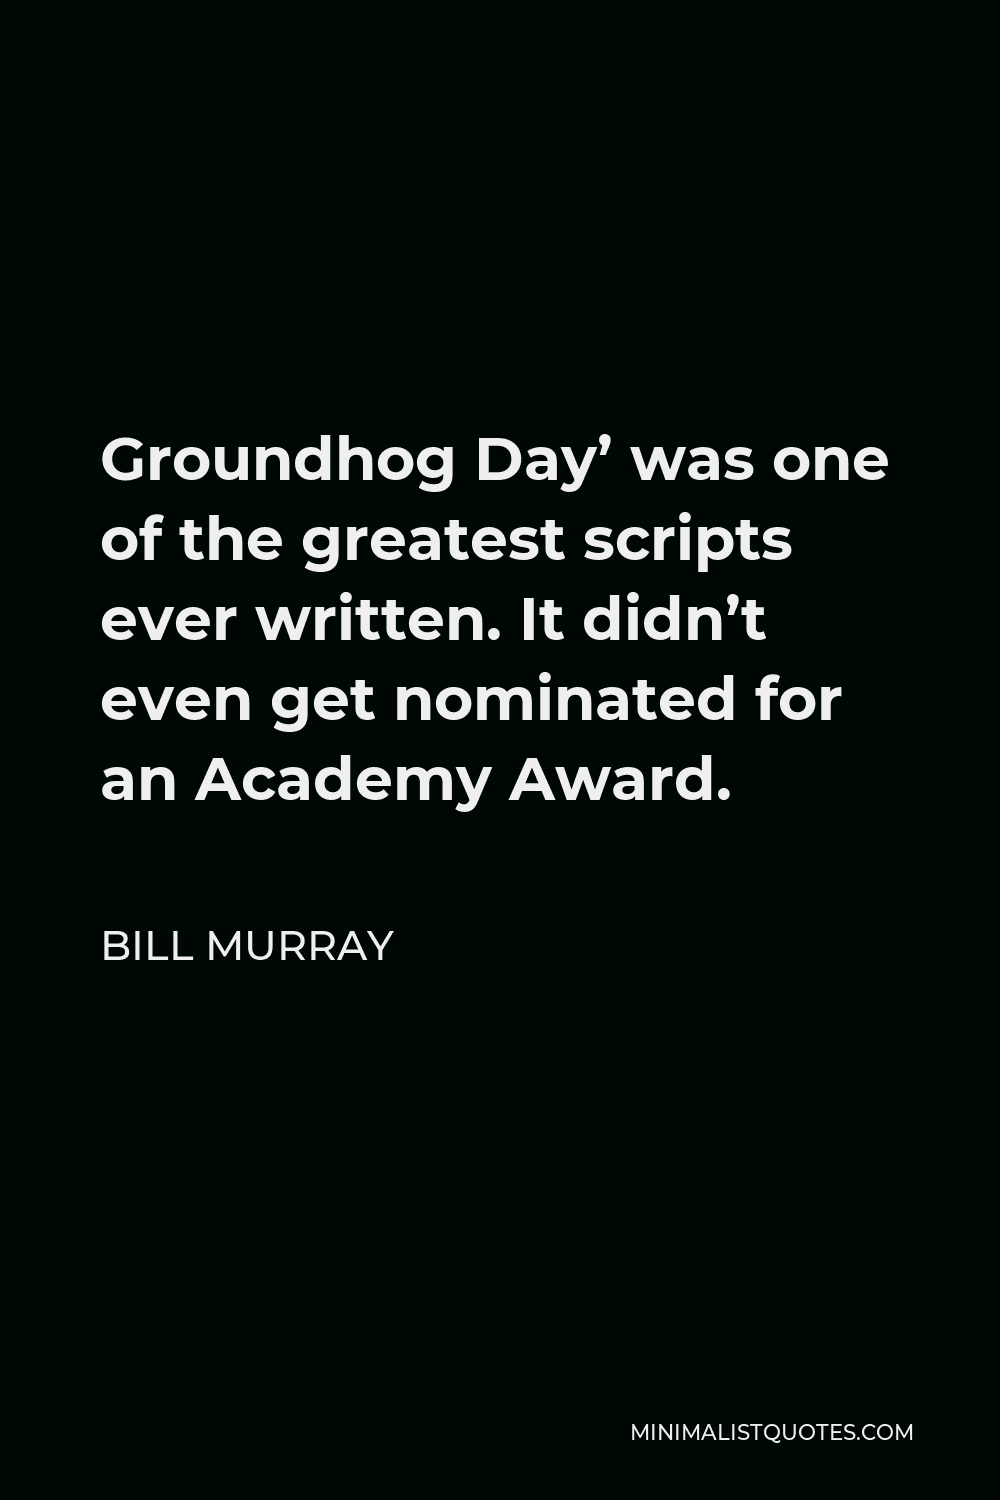 Bill Murray Quote - Groundhog Day’ was one of the greatest scripts ever written. It didn’t even get nominated for an Academy Award.